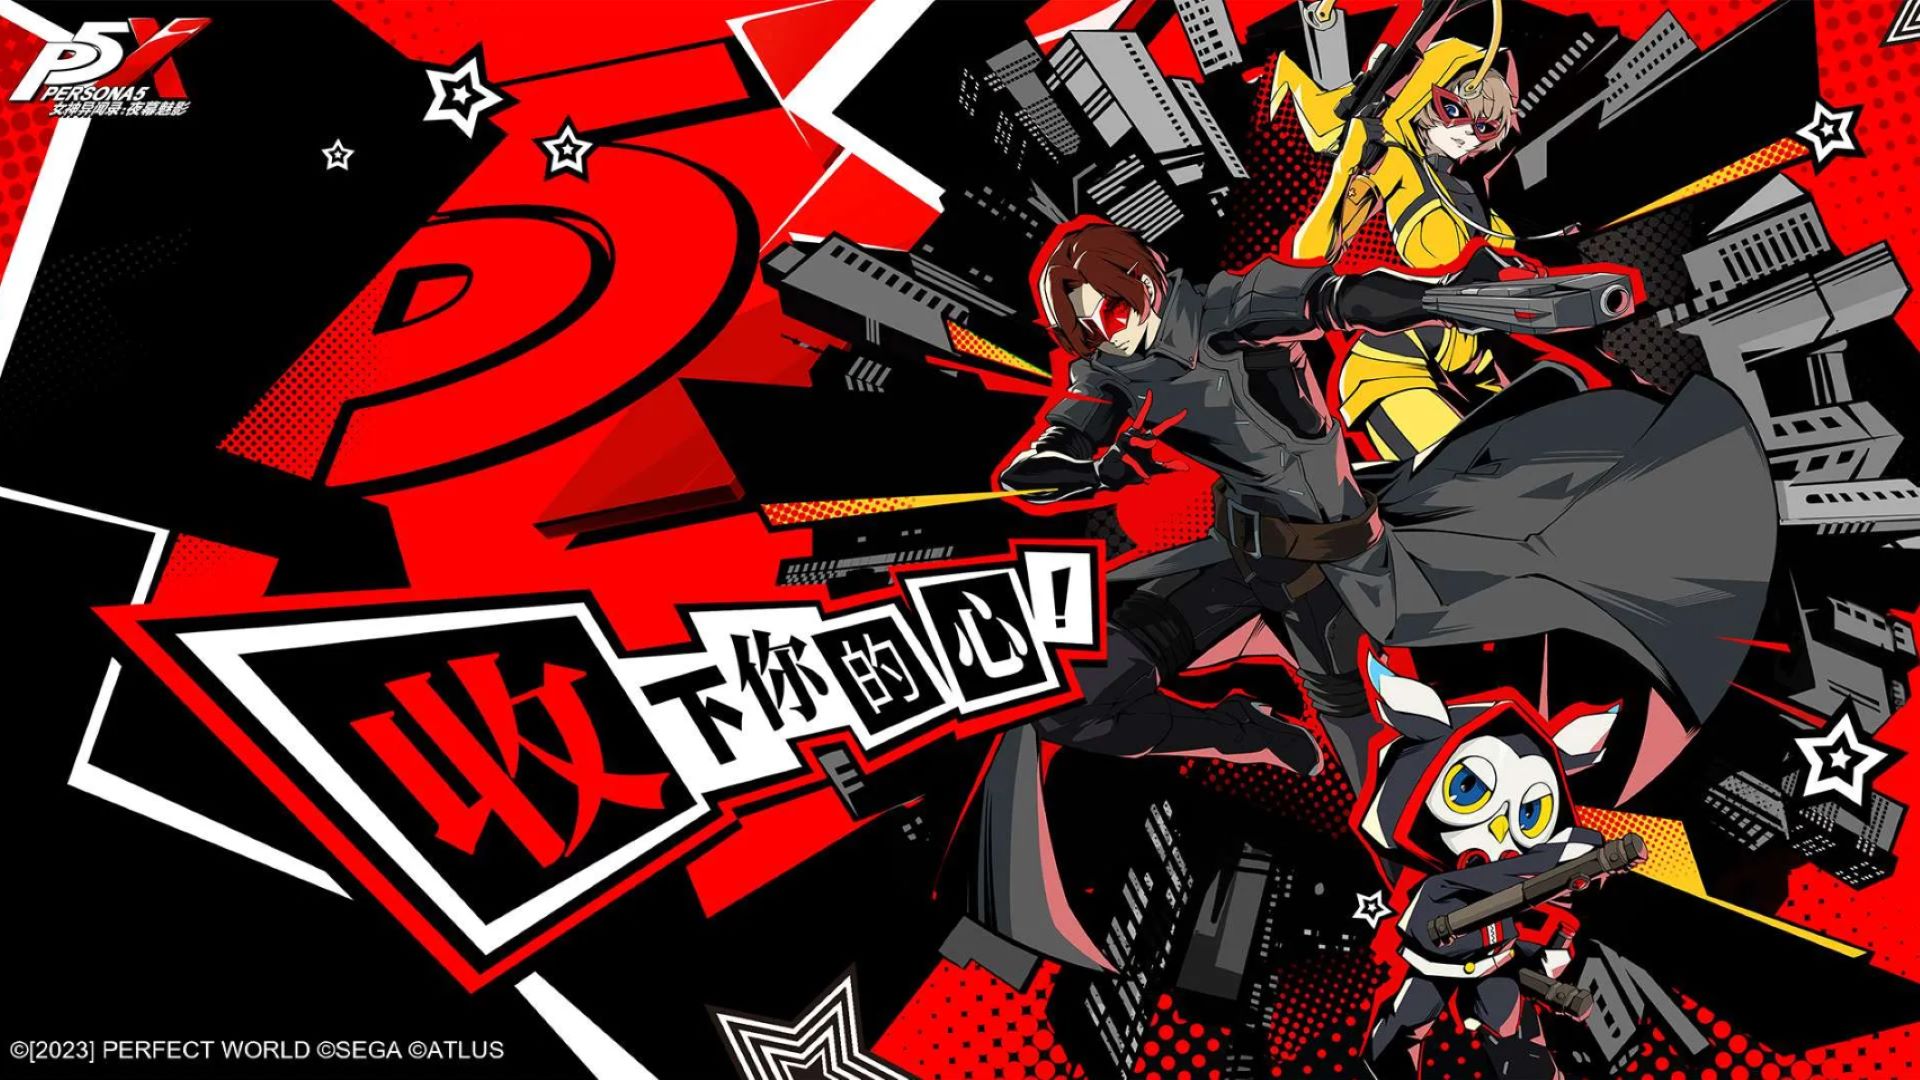 Persona 5 Royal is video game perfection: review – New York Daily News